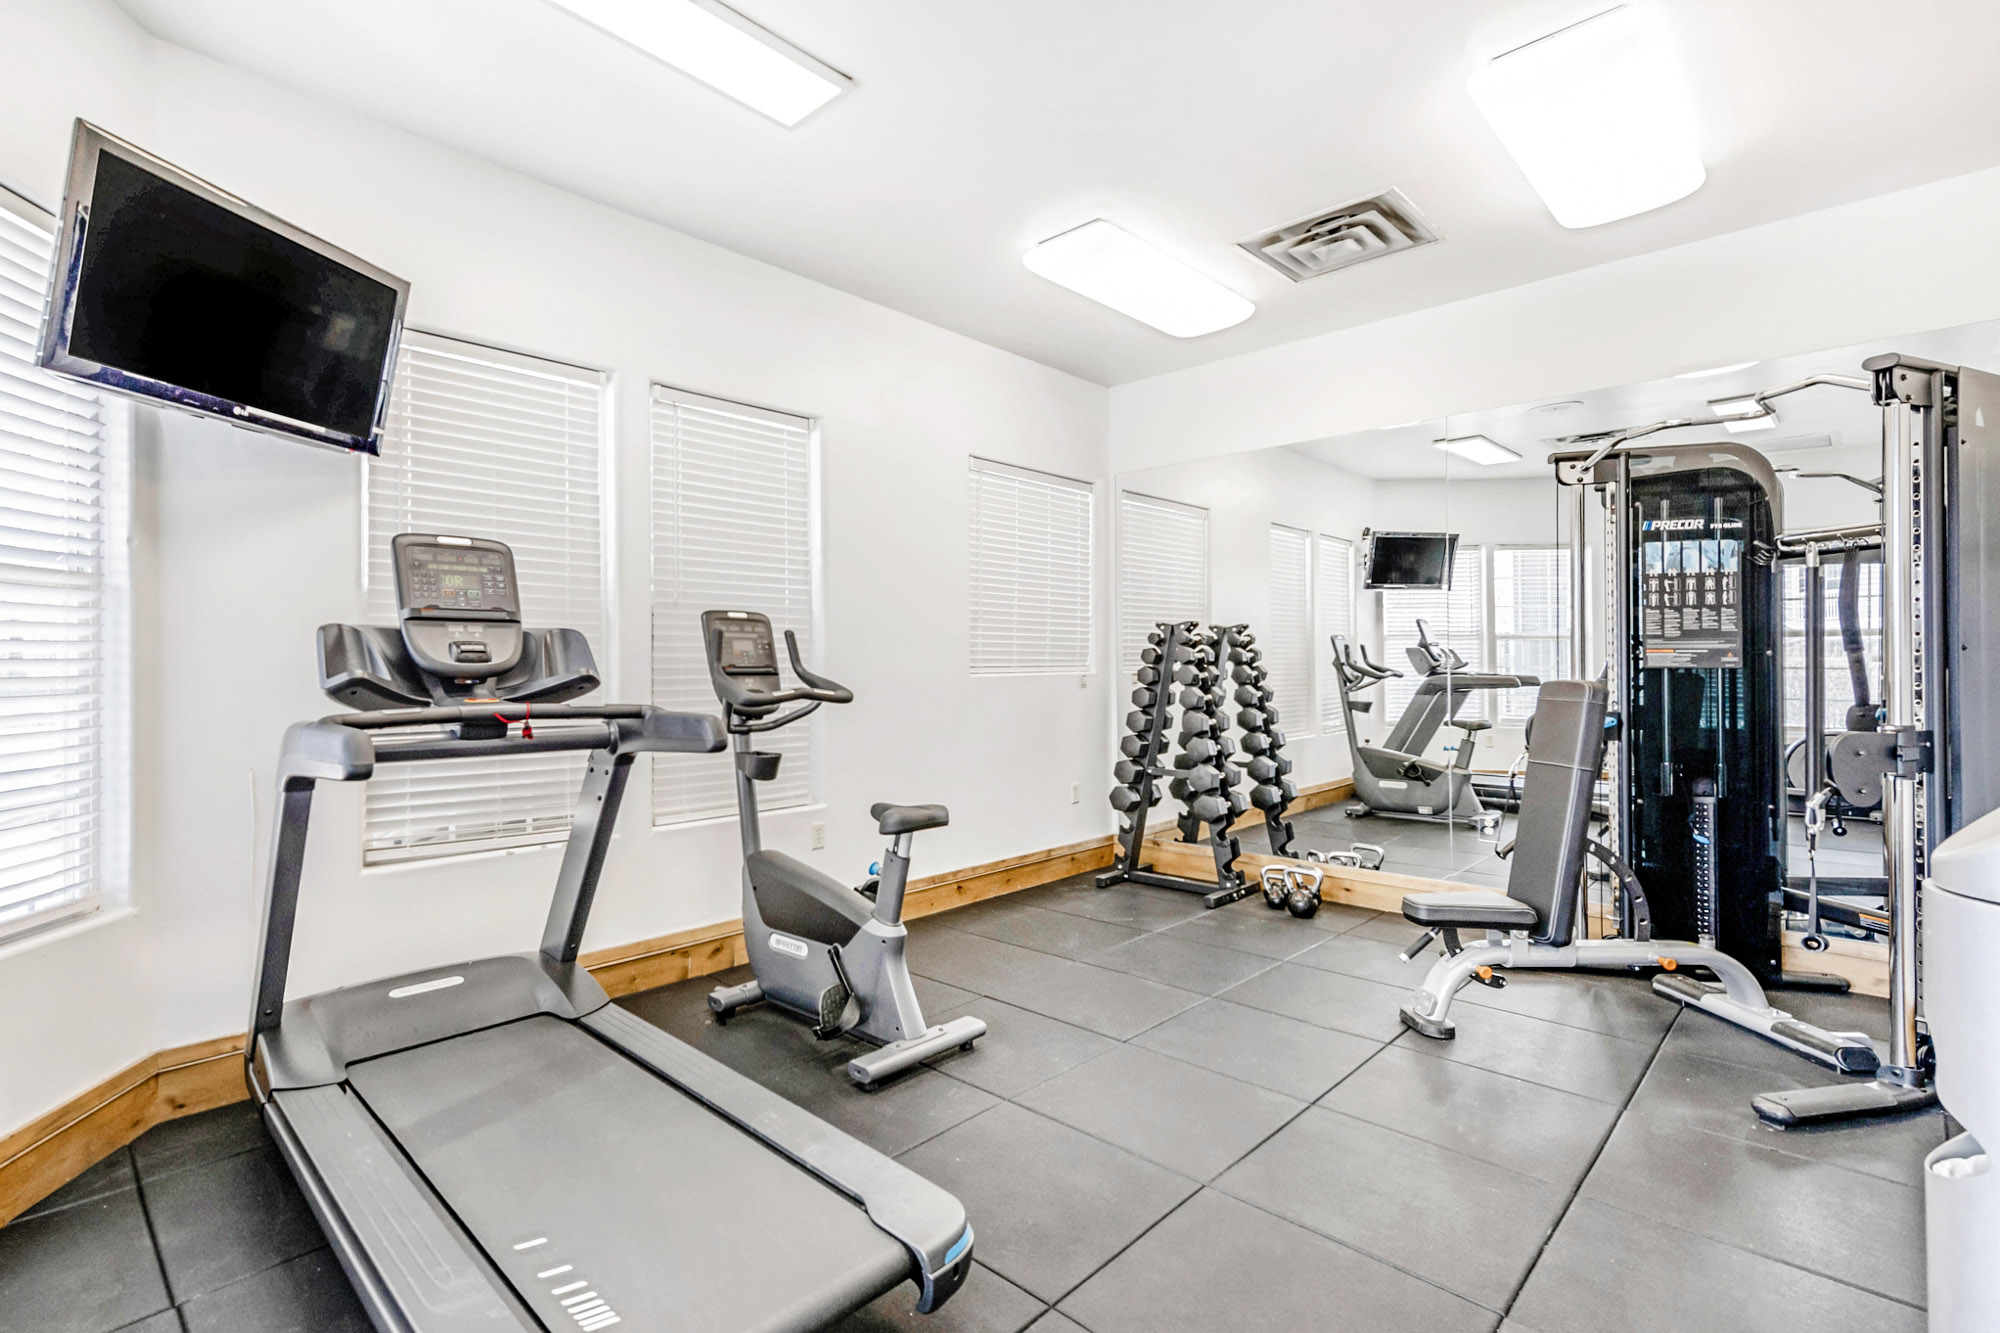 The fitness center at Eagle Ridge apartments in Denver, CO.